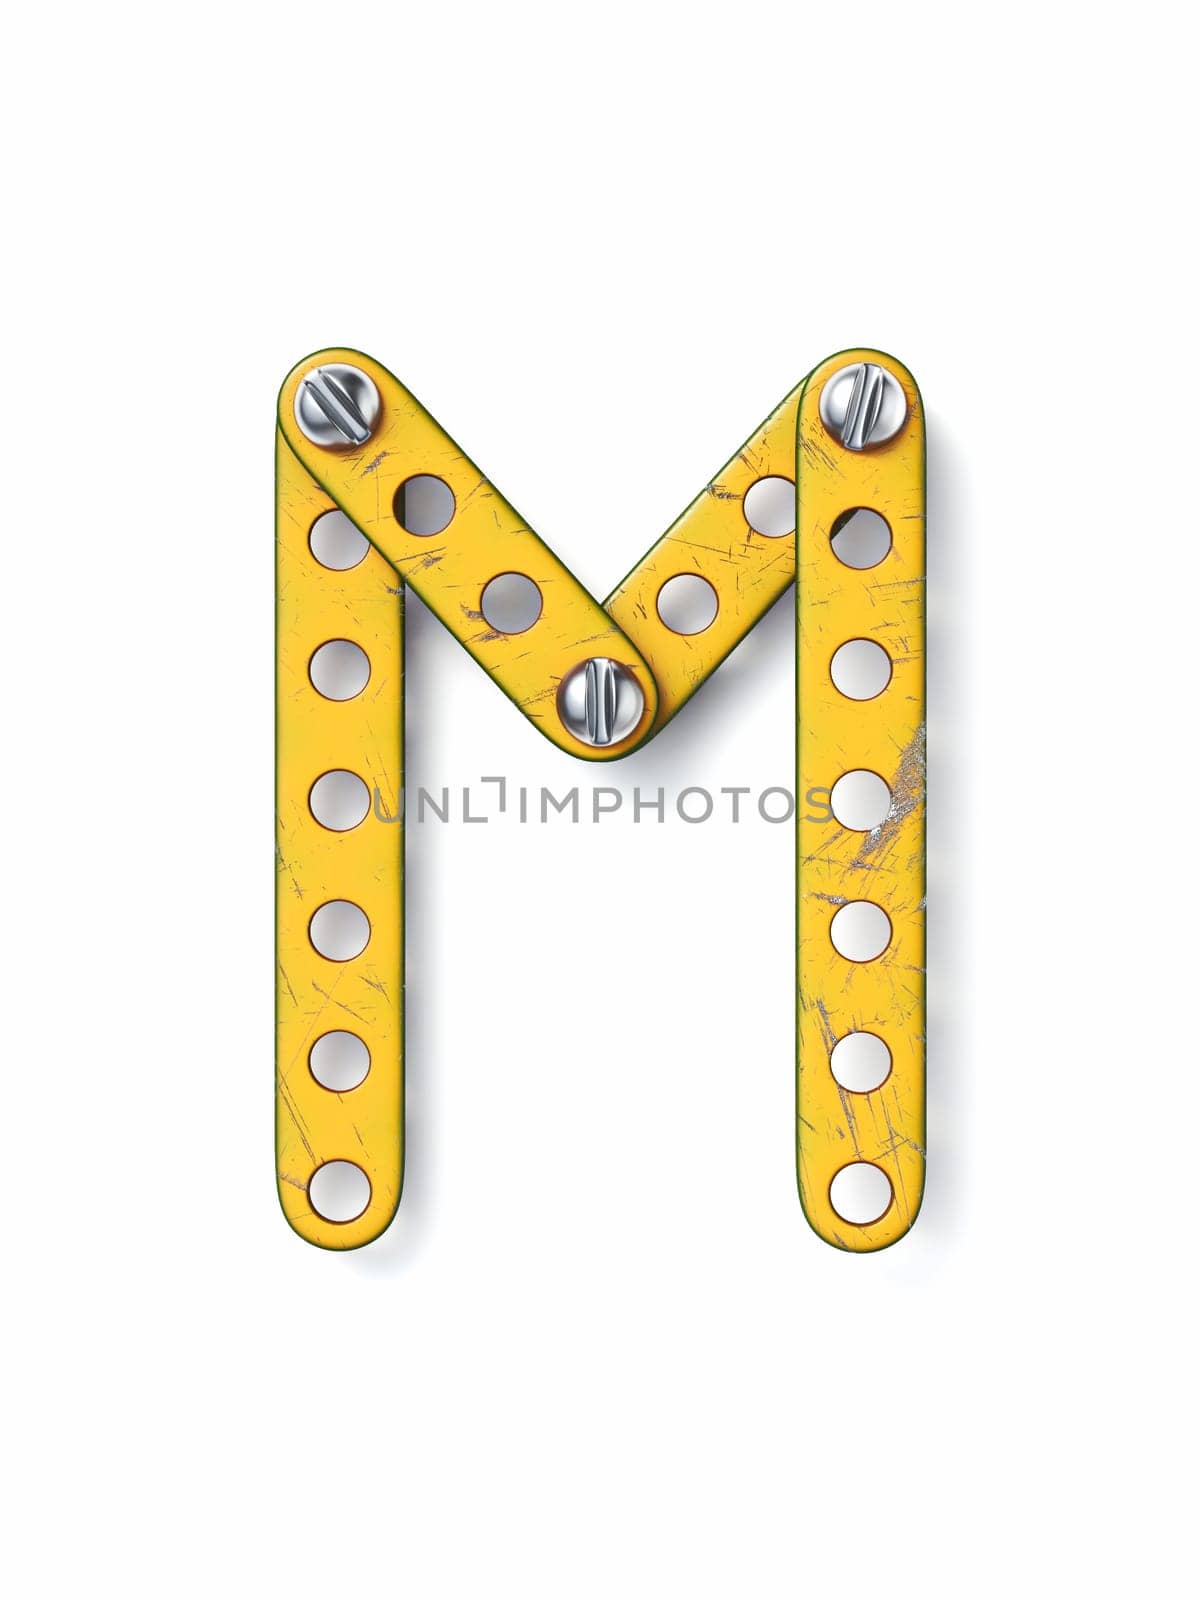 Aged yellow constructor font Letter M 3D rendering illustration isolated on white background